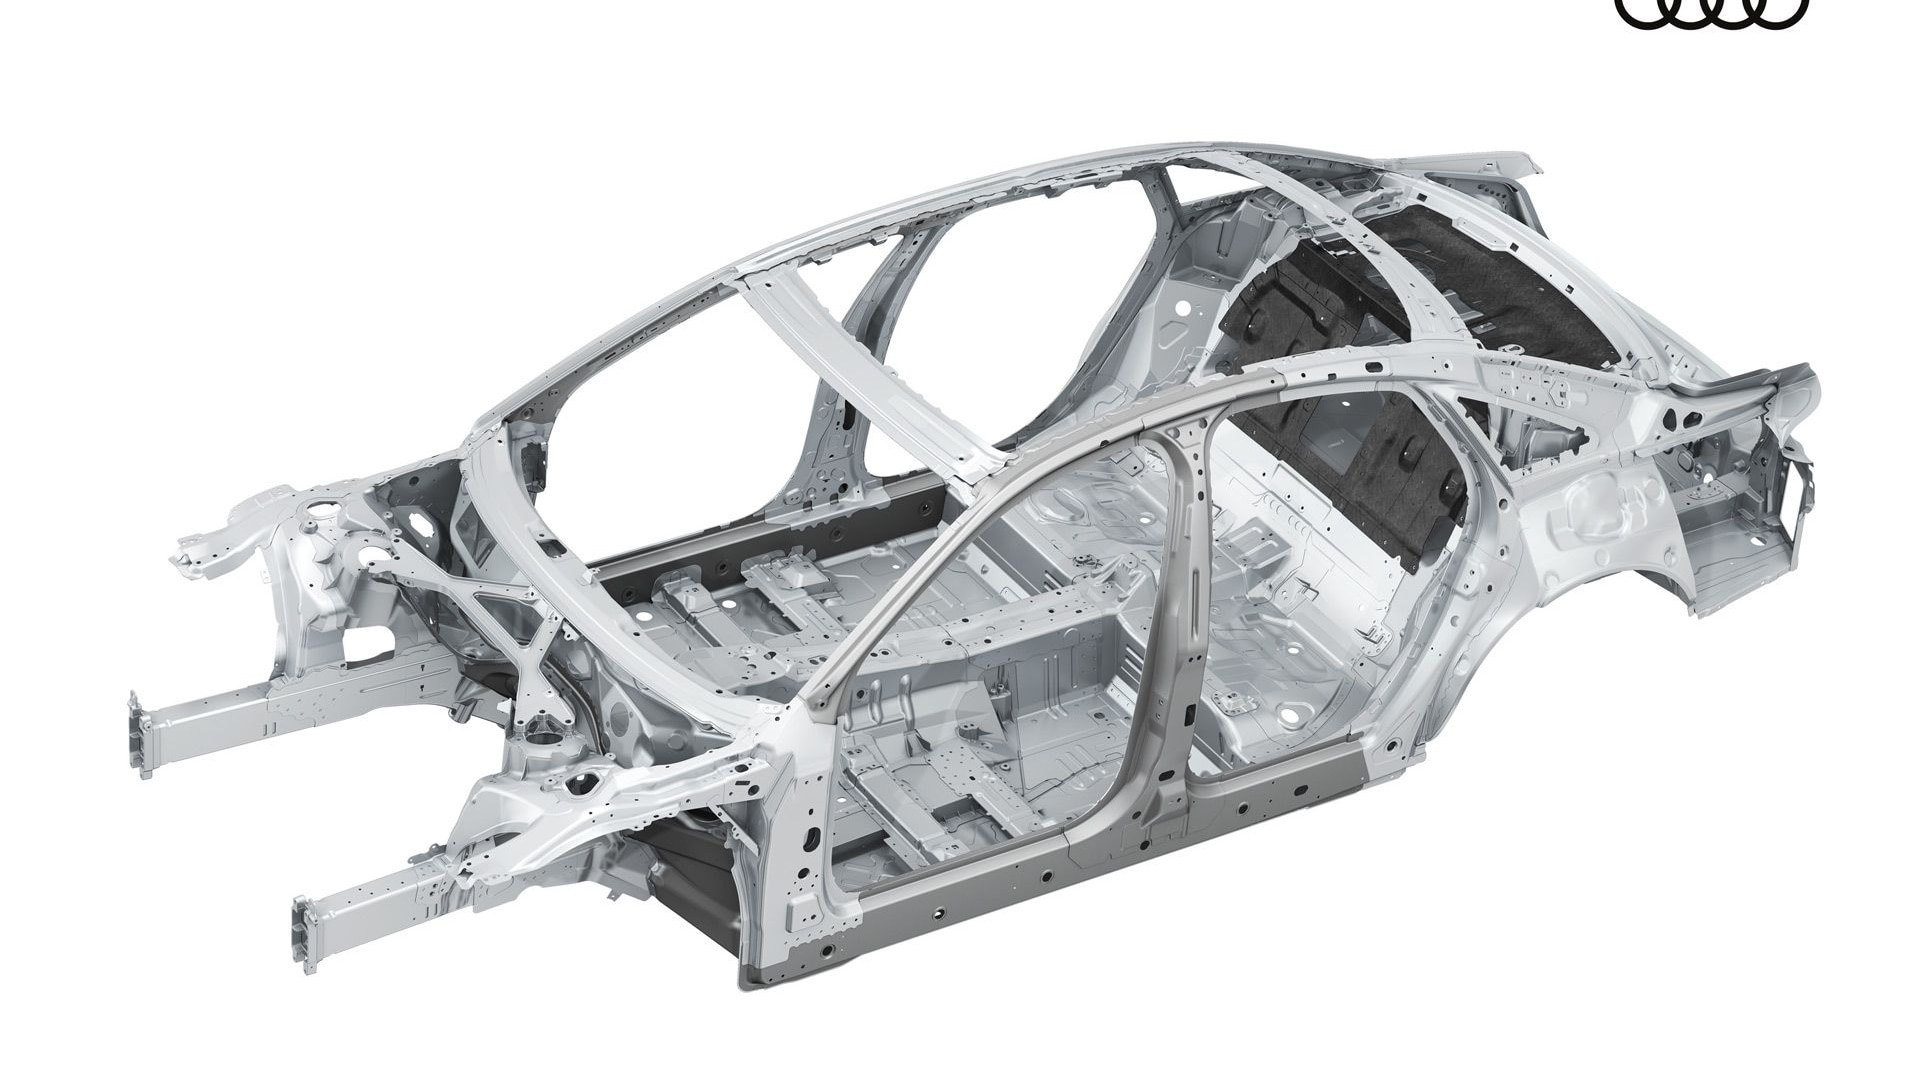 2019 Audi A8’s multi-material spaceframe